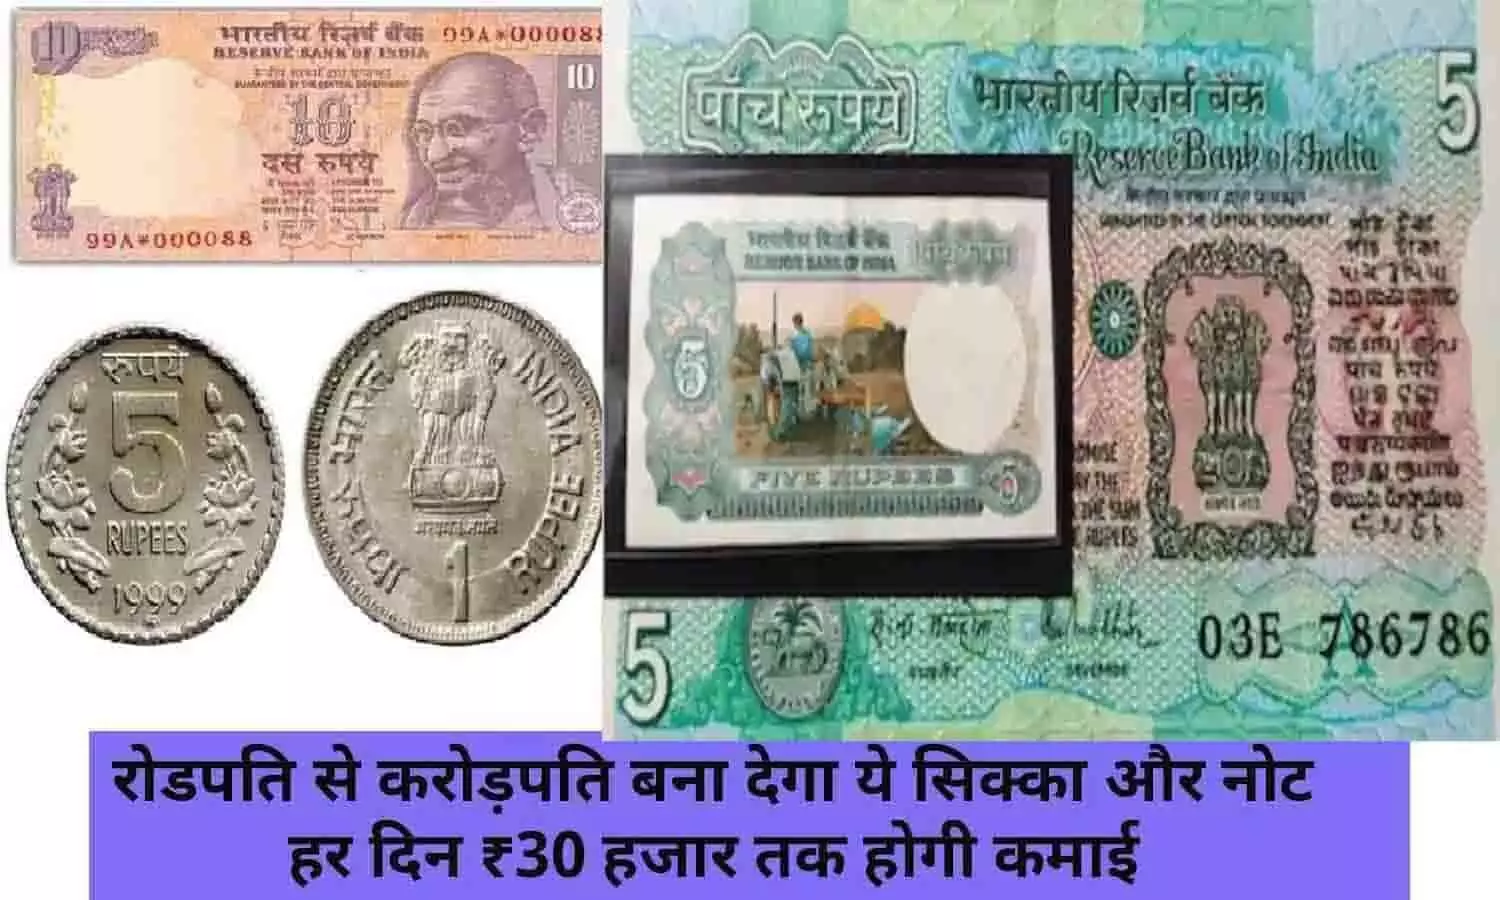 old Indian currency 5 rupee note